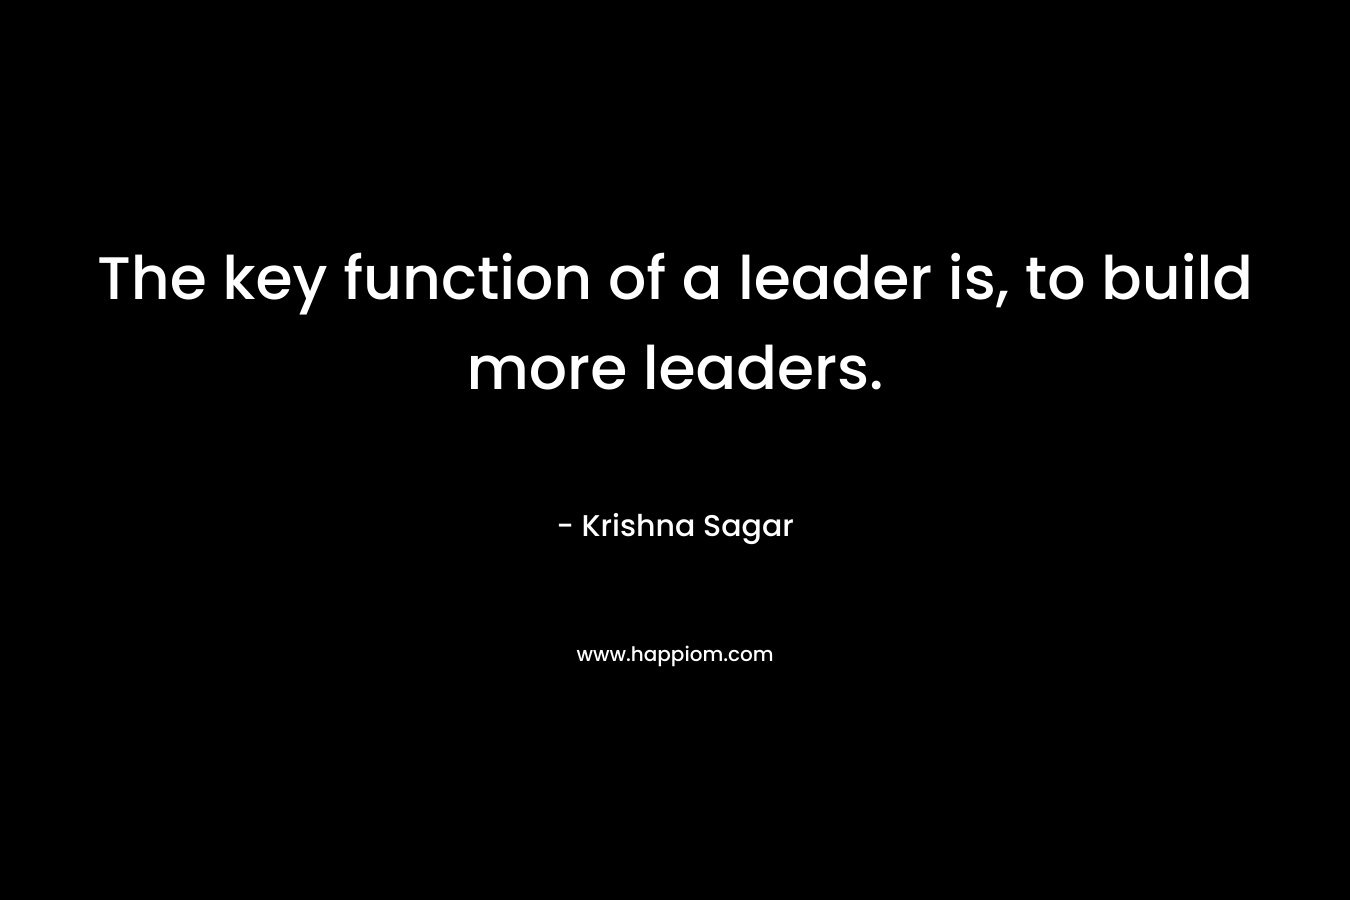 The key function of a leader is, to build more leaders. – Krishna Sagar